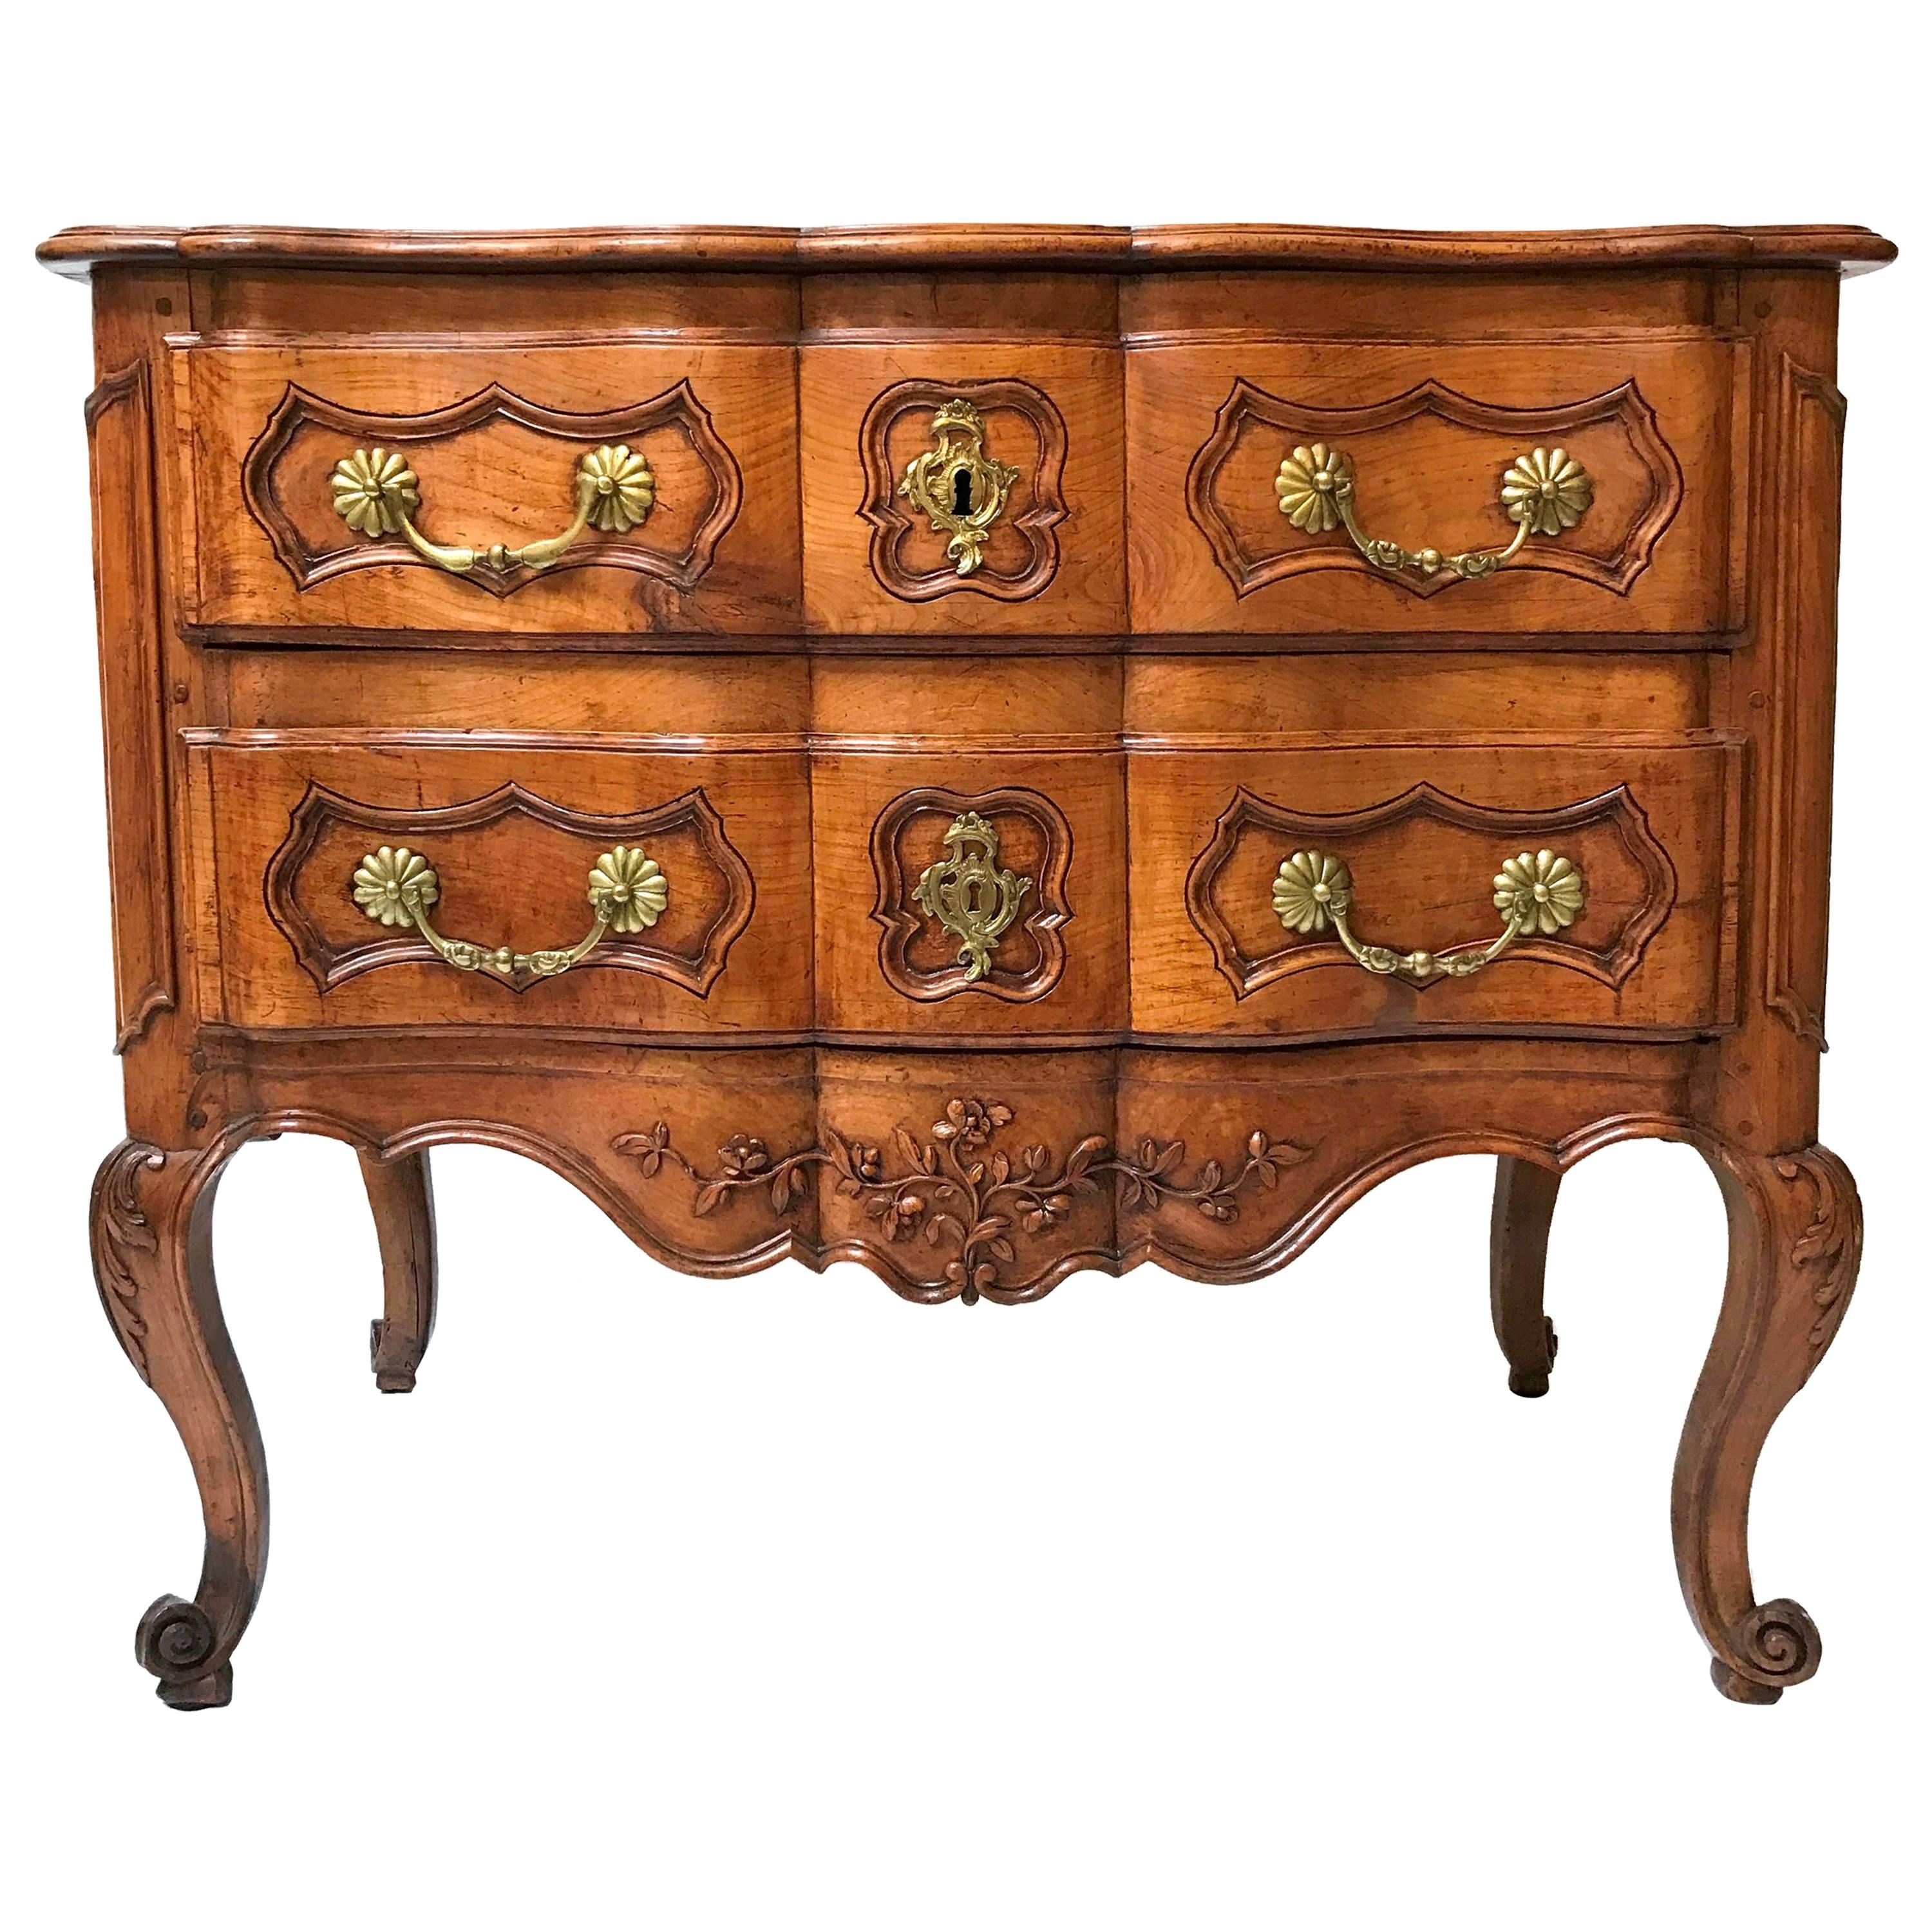 Period Regence Cherrywood Commode For Sale